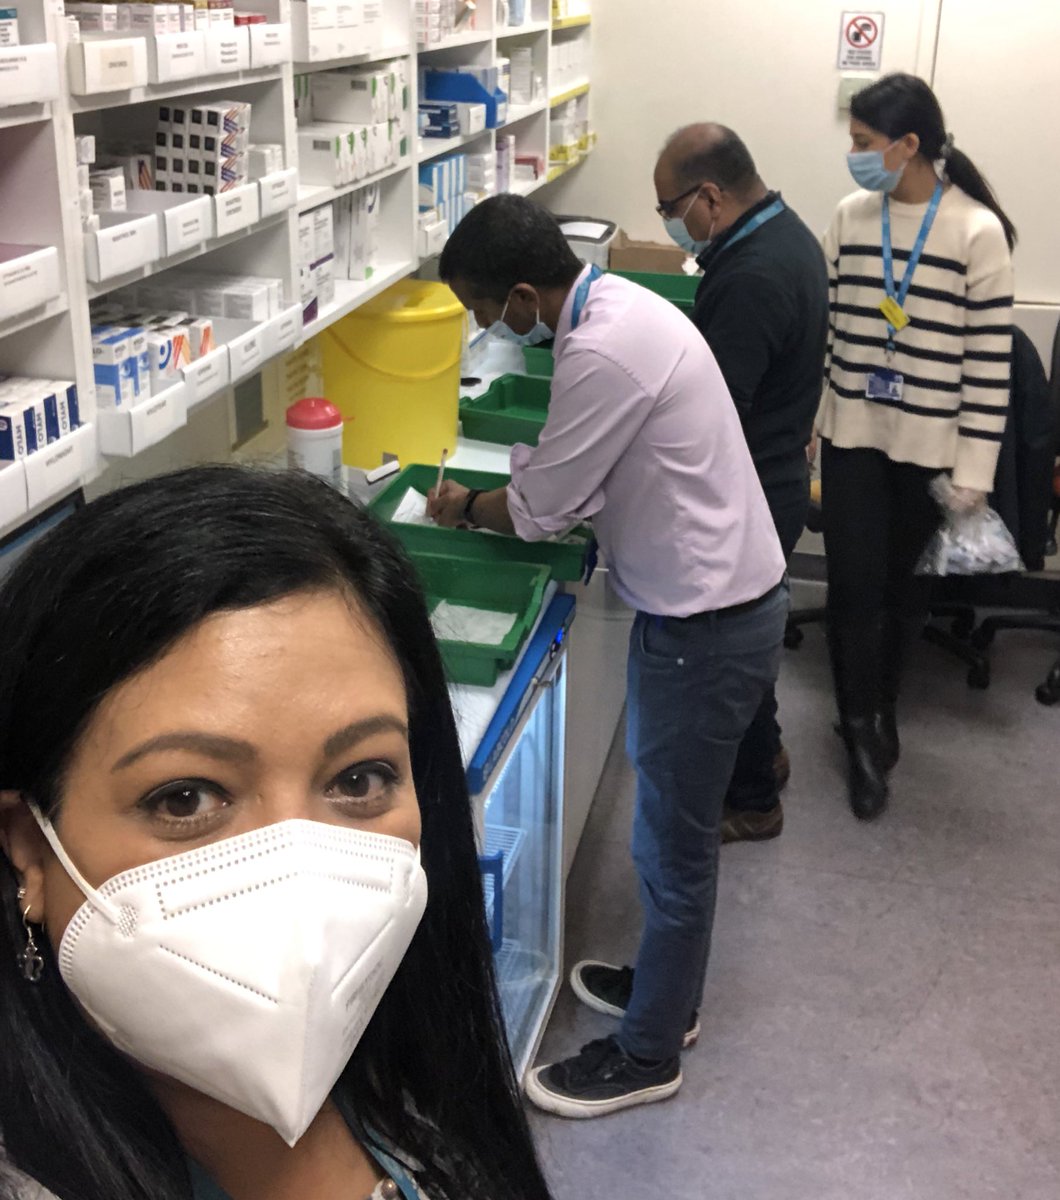 It’s all systems go @Moorfields #Pharmacy team busy preparing #Covid #Vaccines to support the wider roll out of the vaccination programme 💉 🦠 😷  let’s see how many people we will vaccinate today 😸💪🏼 💉🩹 #MoorfieldsStaff 💙